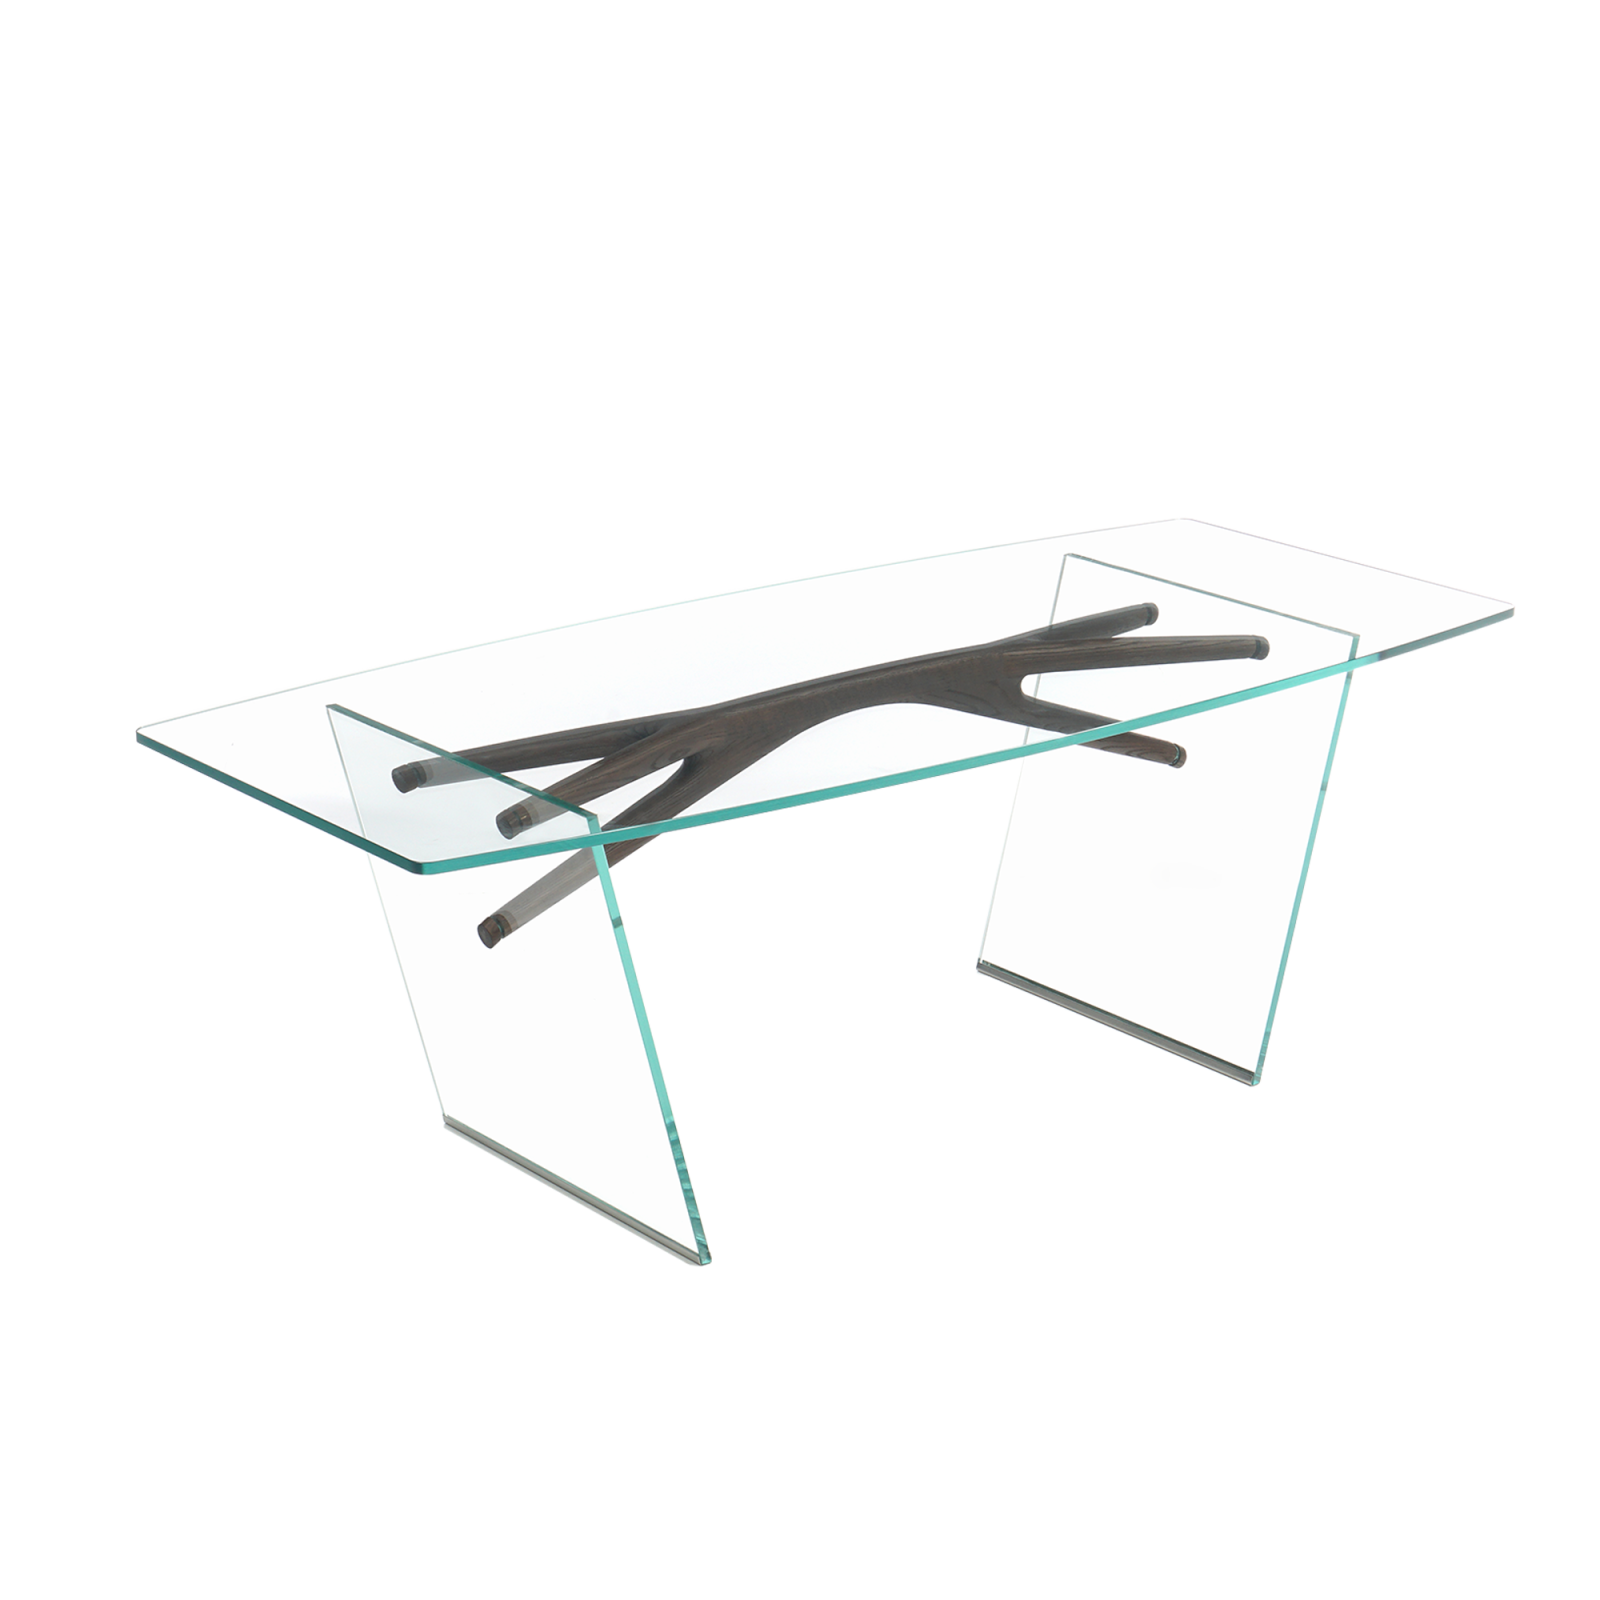 A transparent glass Loop table supported by a structural element in solid walnut. Standing on a white background.